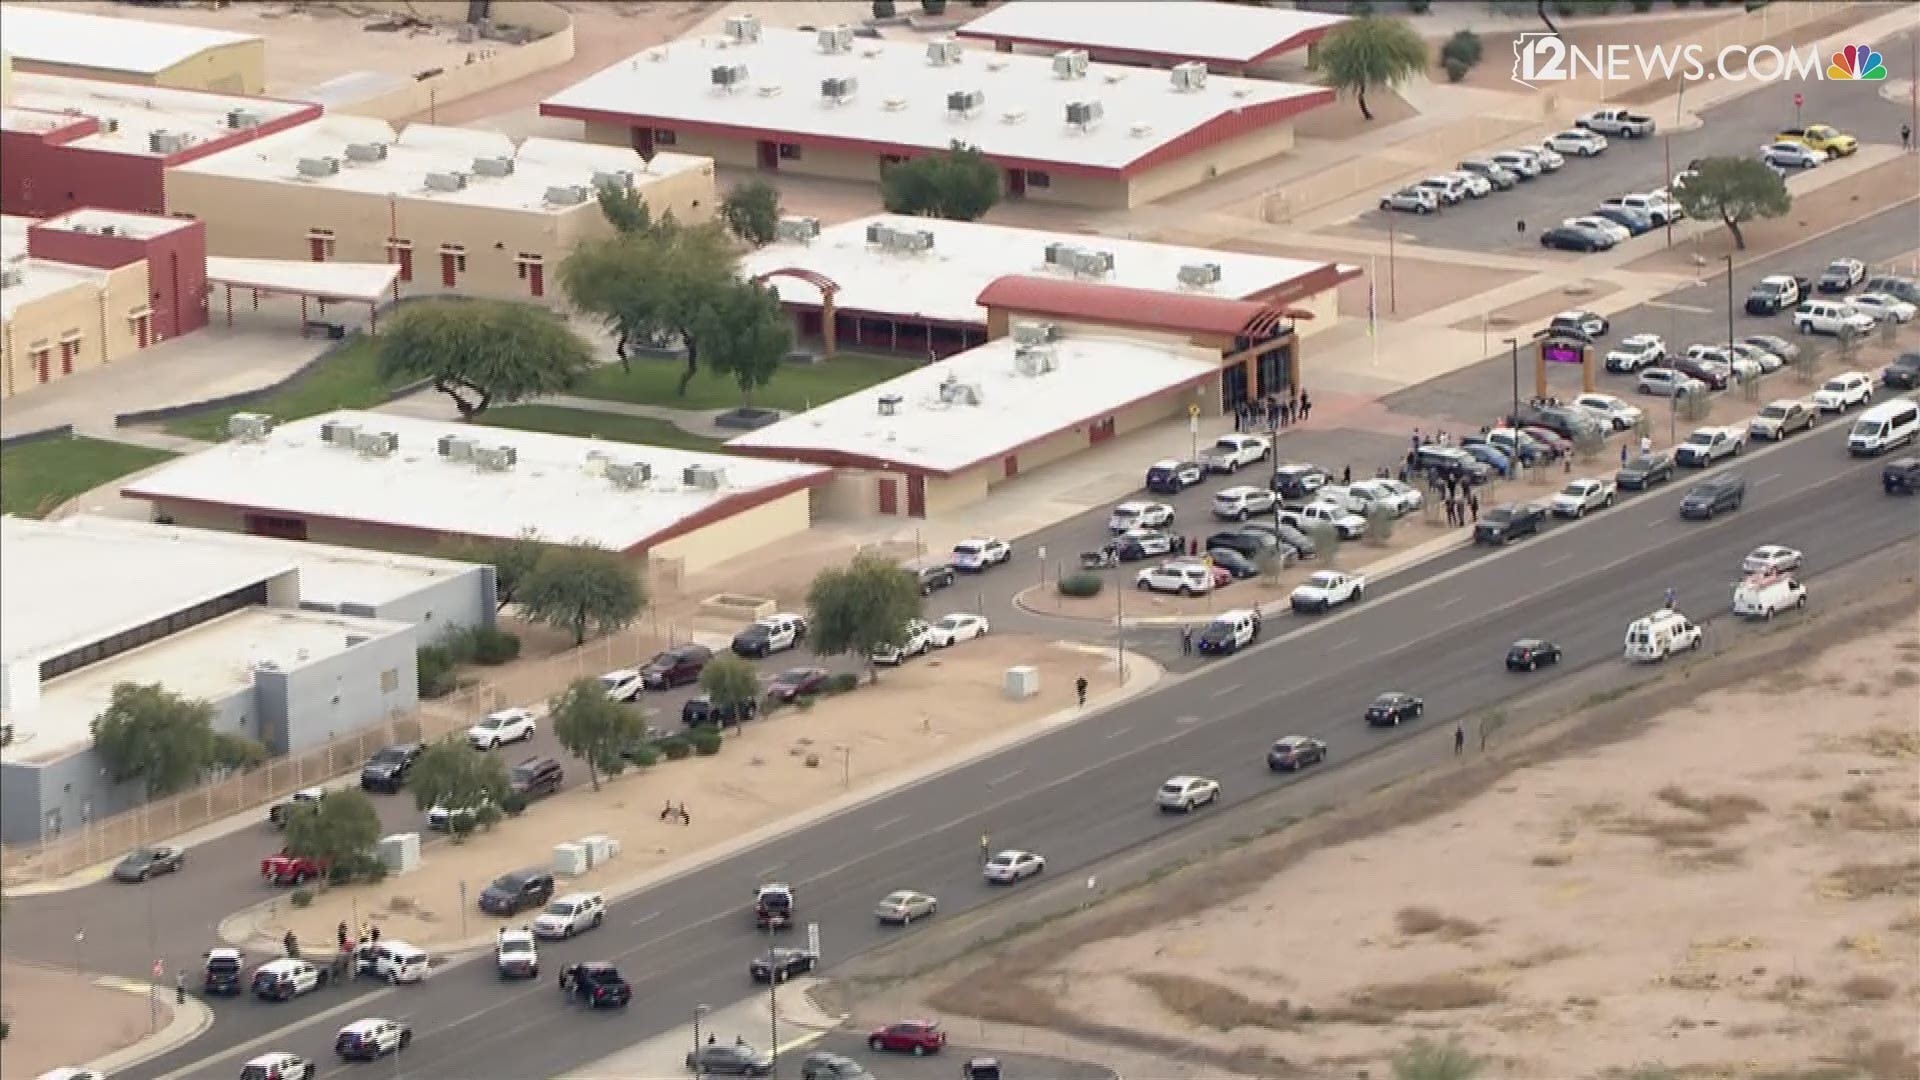 There is no threat to Apache Junction HS after a reported incident forced a lock down Friday afternoon. Students are safe.